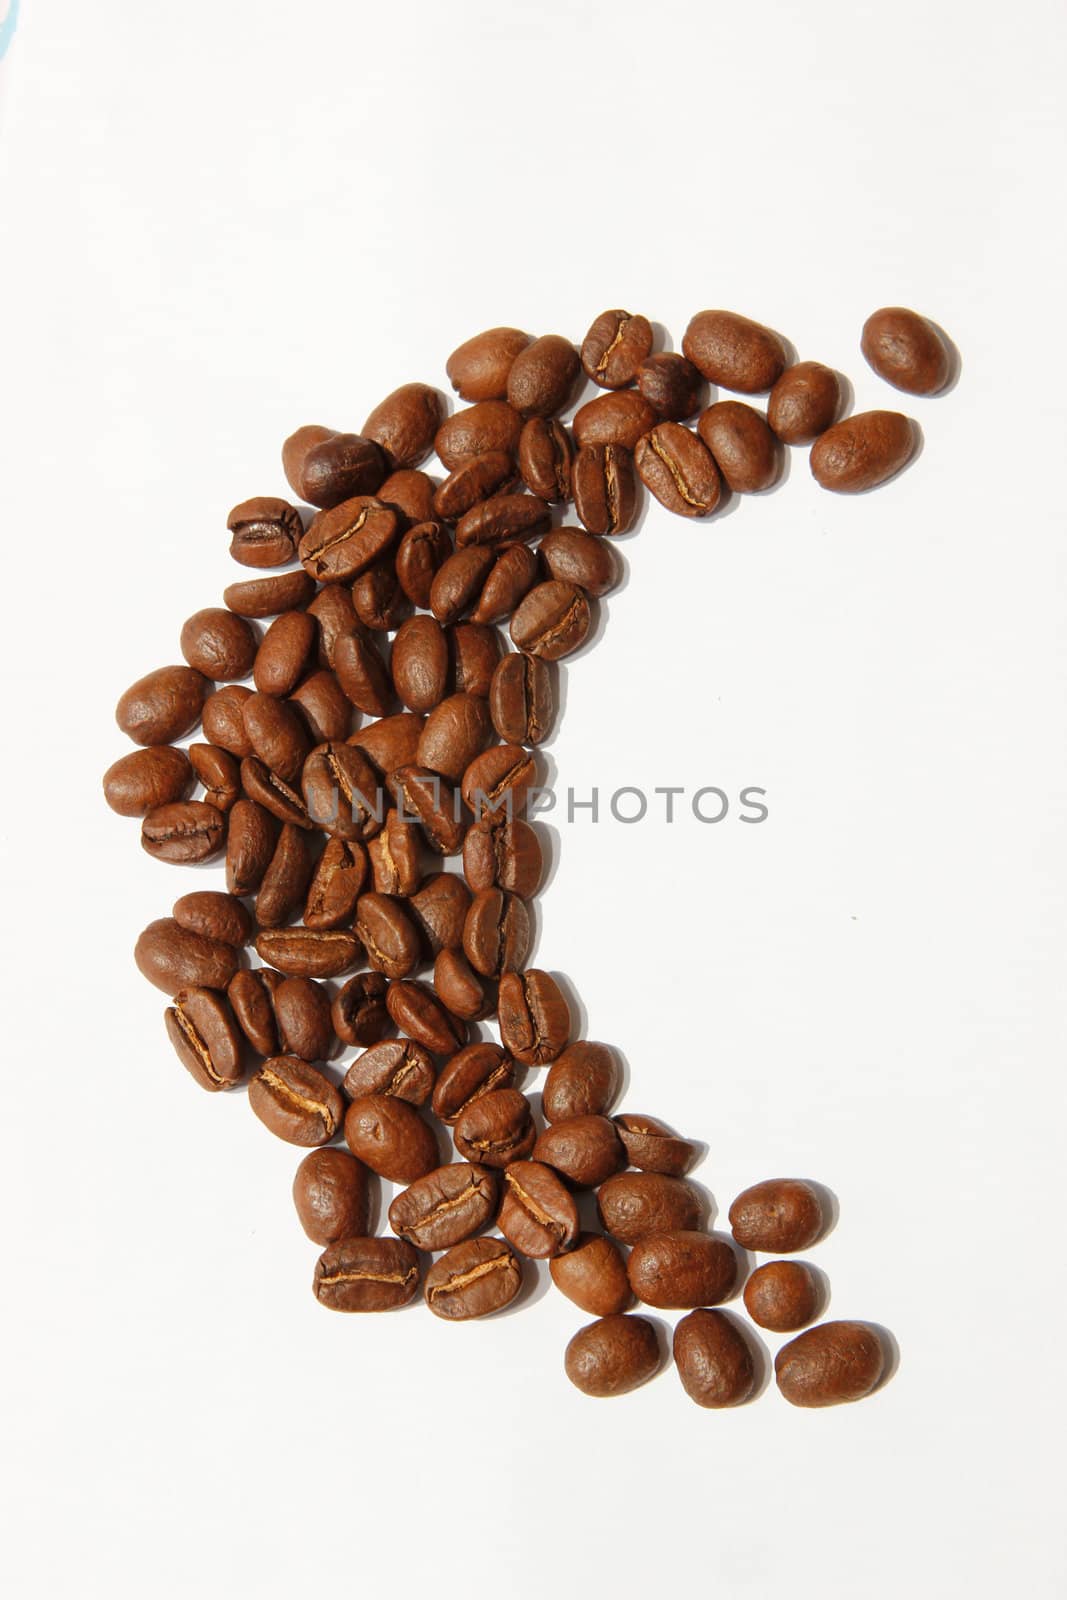 moon of coffee beans on the white background